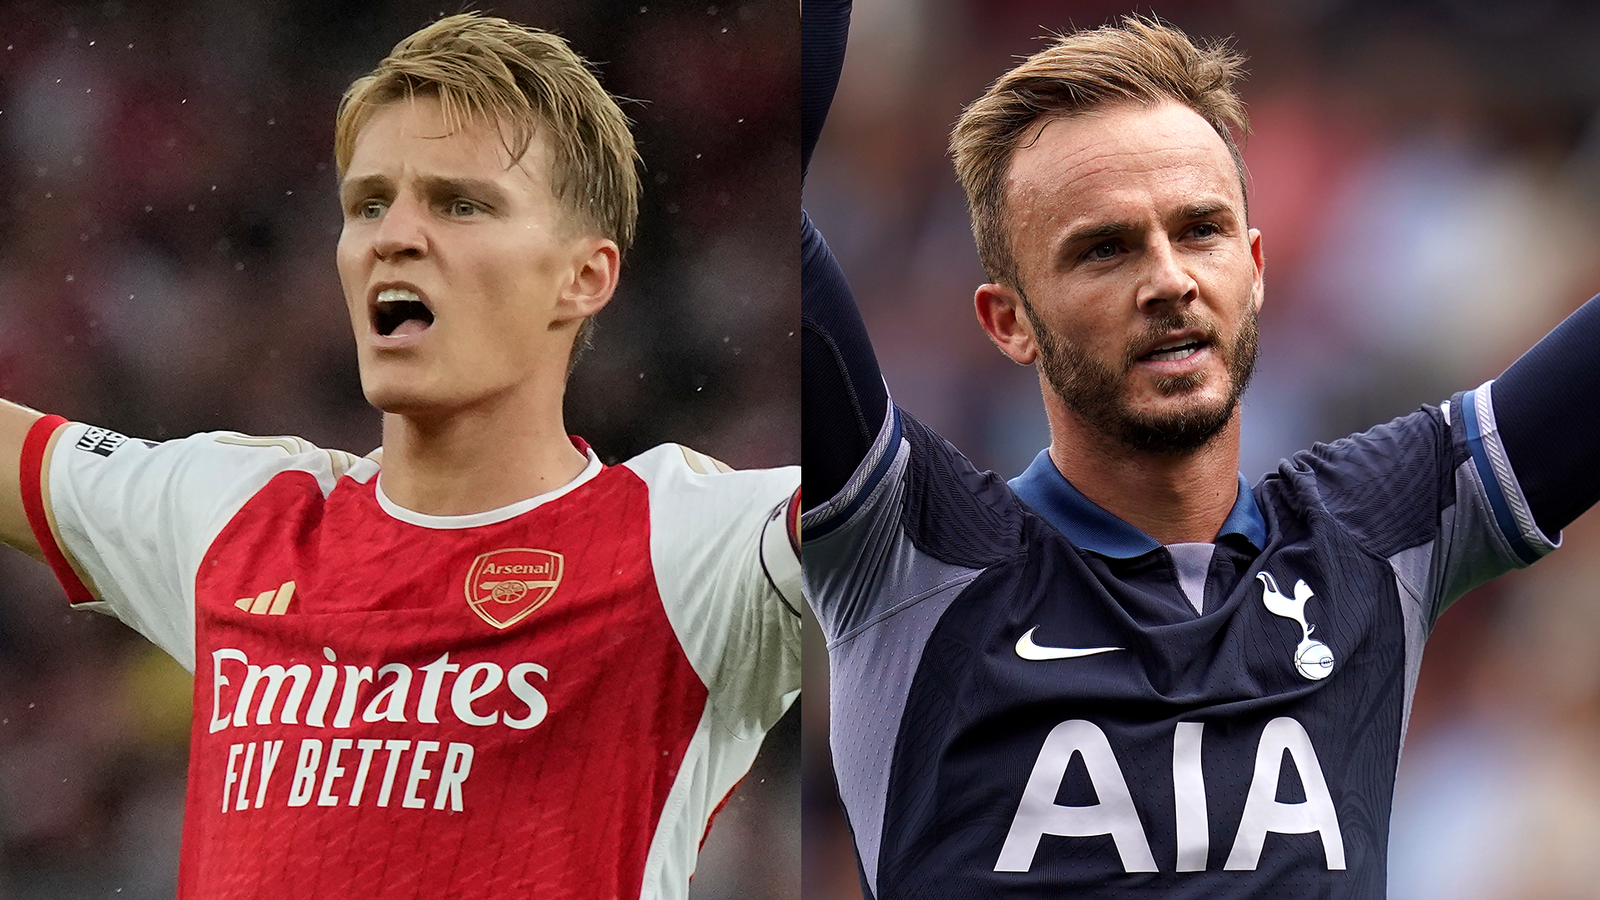 Arsenal vs Tottenham The stats and styles behind the rivals impressive Premier League starts Football News Sky Sports